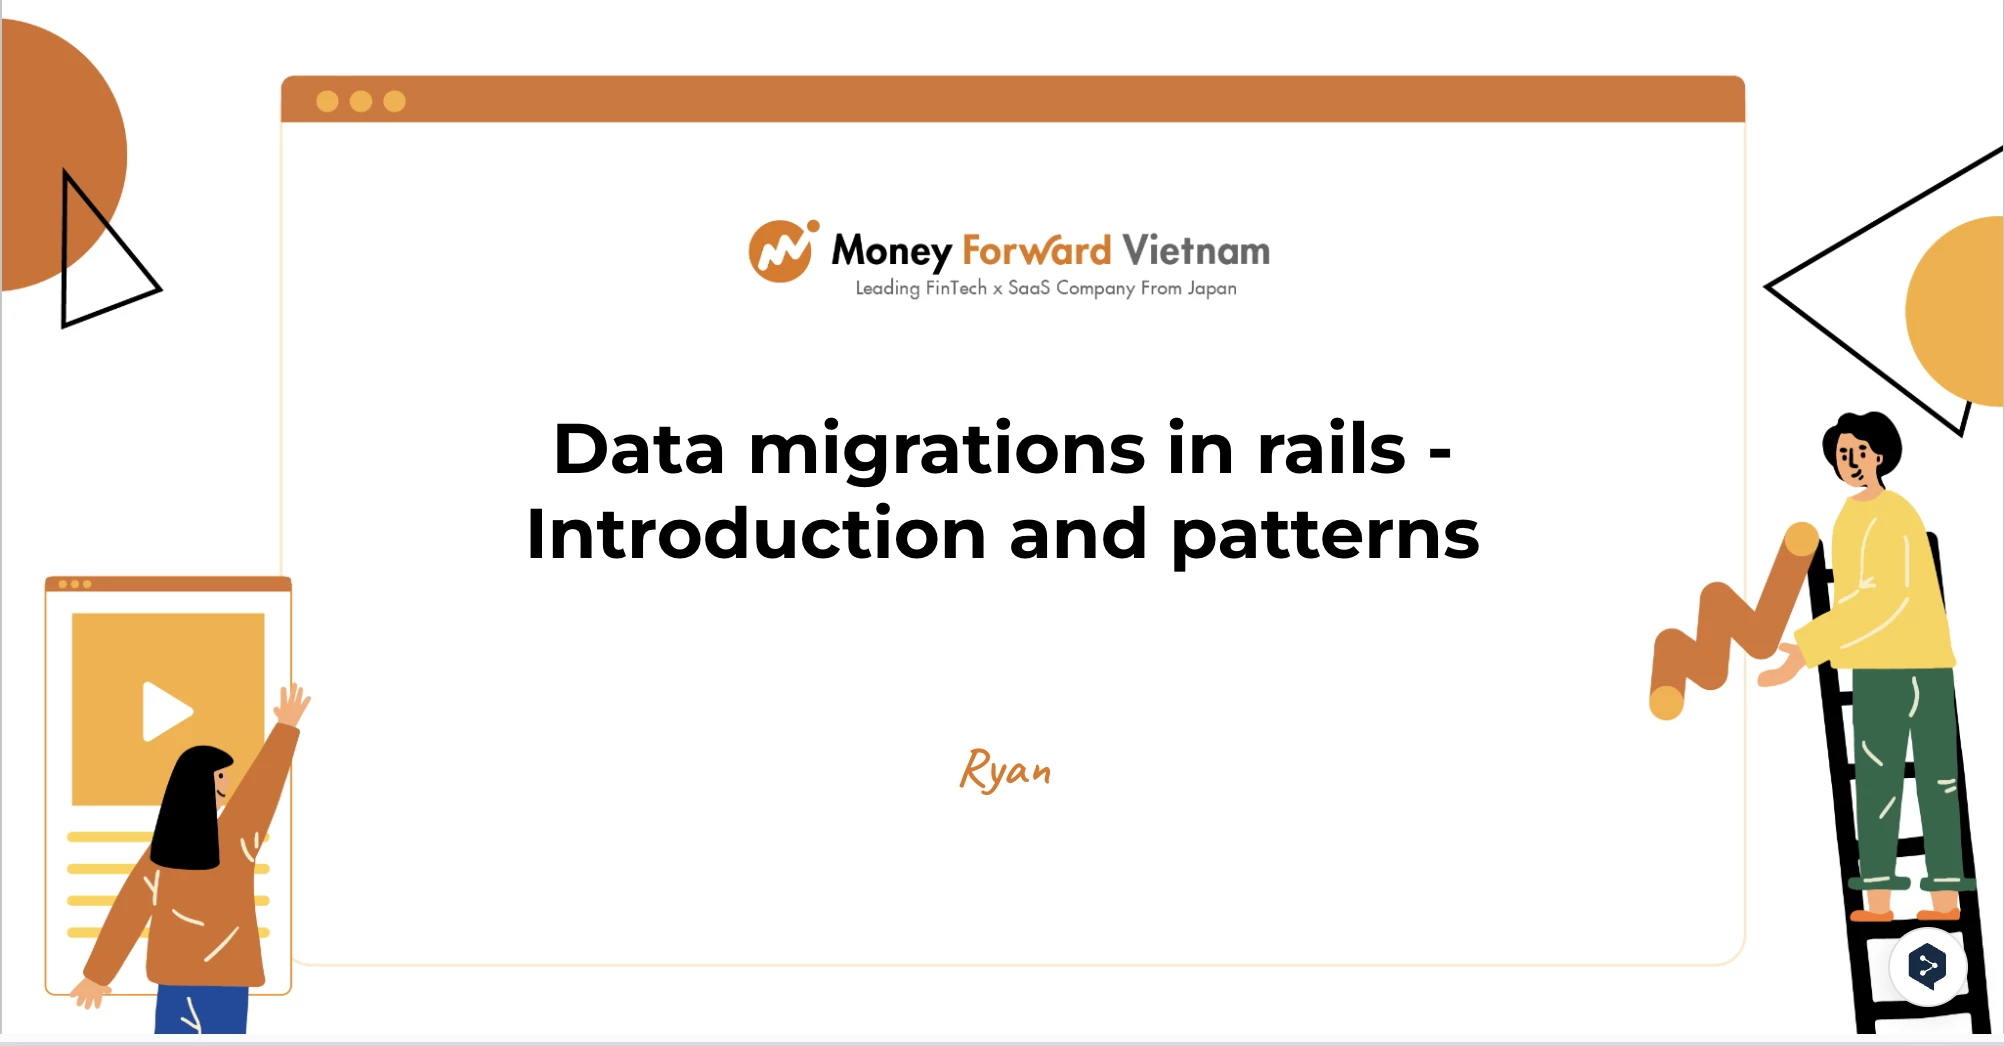 Data migrations in rails - Introduction and patterns